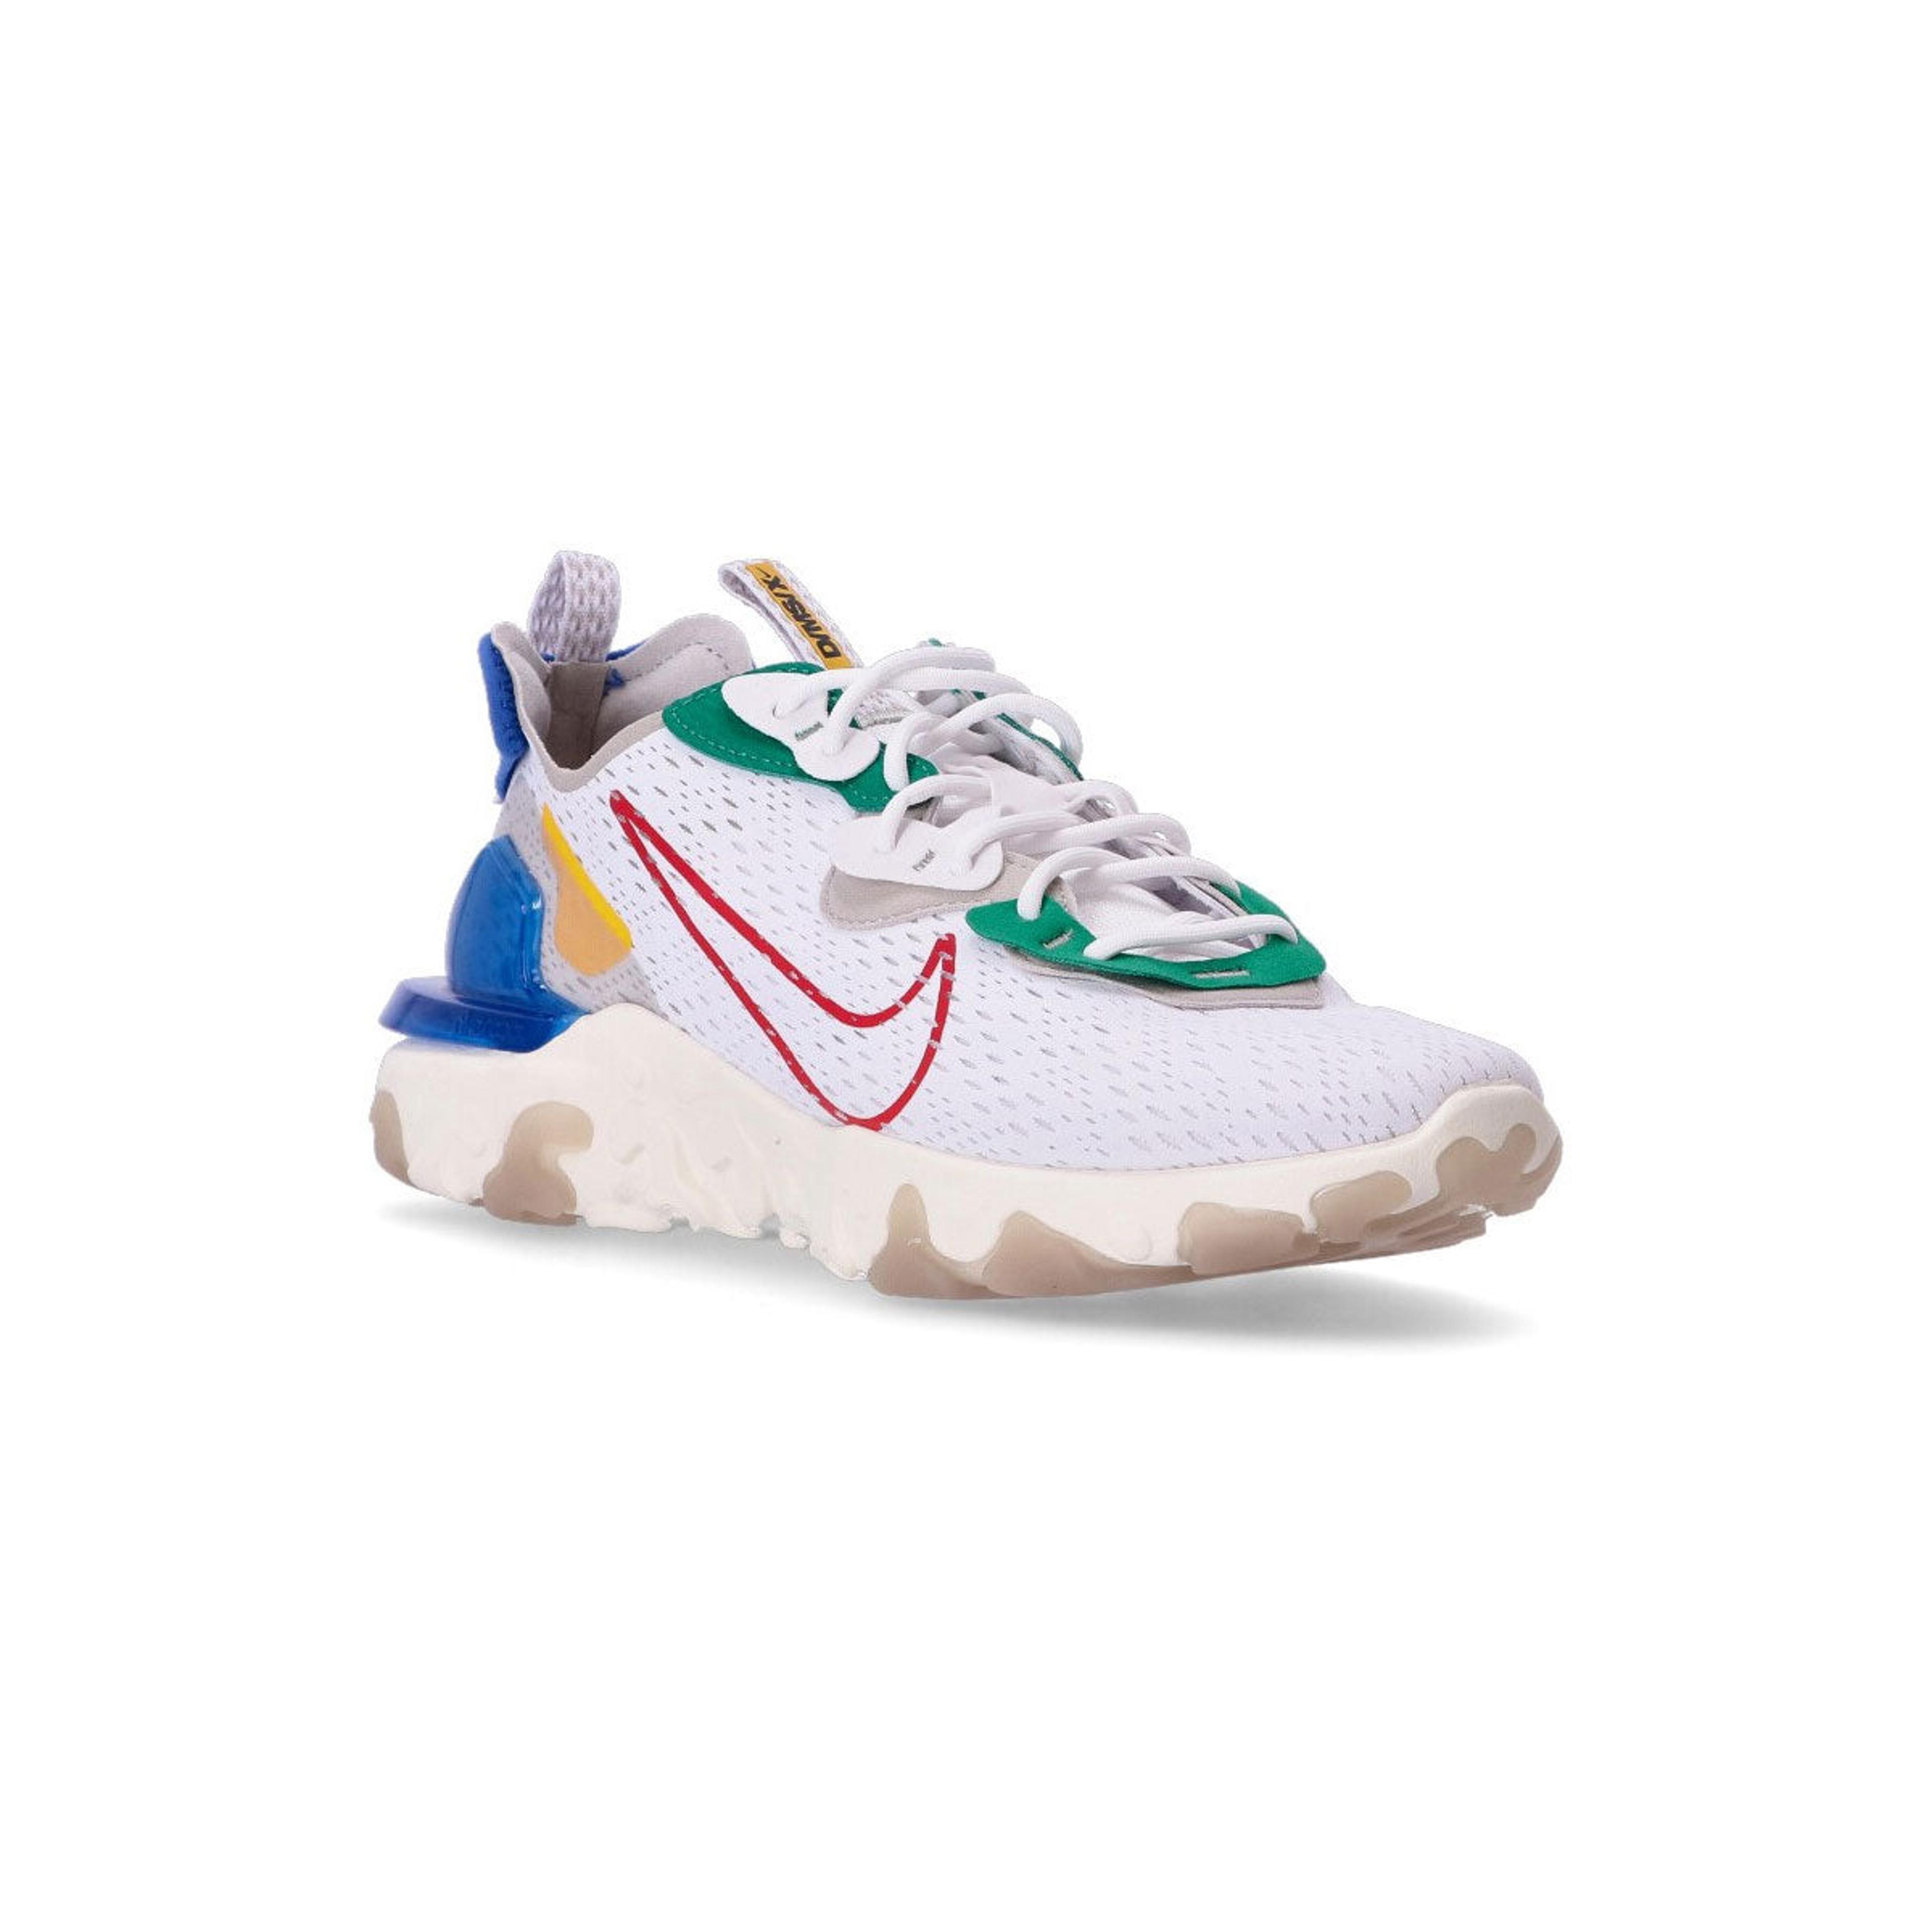 Alternate View 1 of Nike Men's React Vision Summer Brights